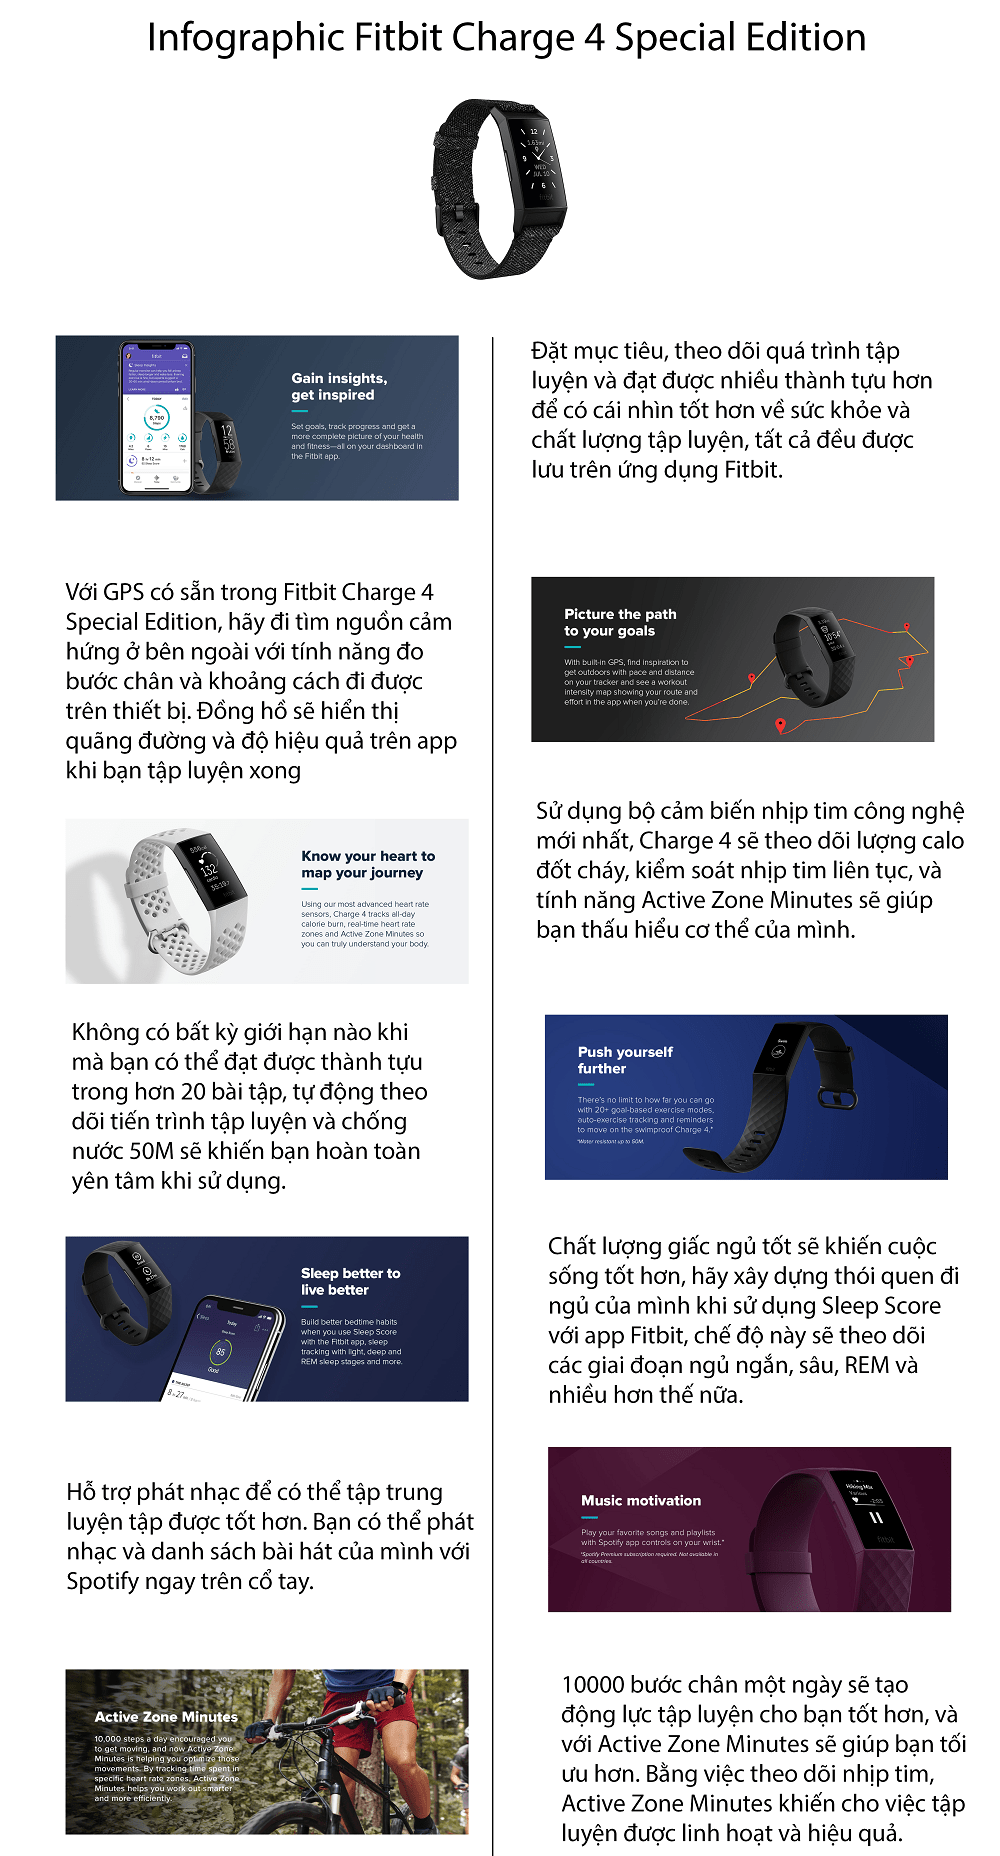 Infographic Fitbit Charge 4 Special Edition